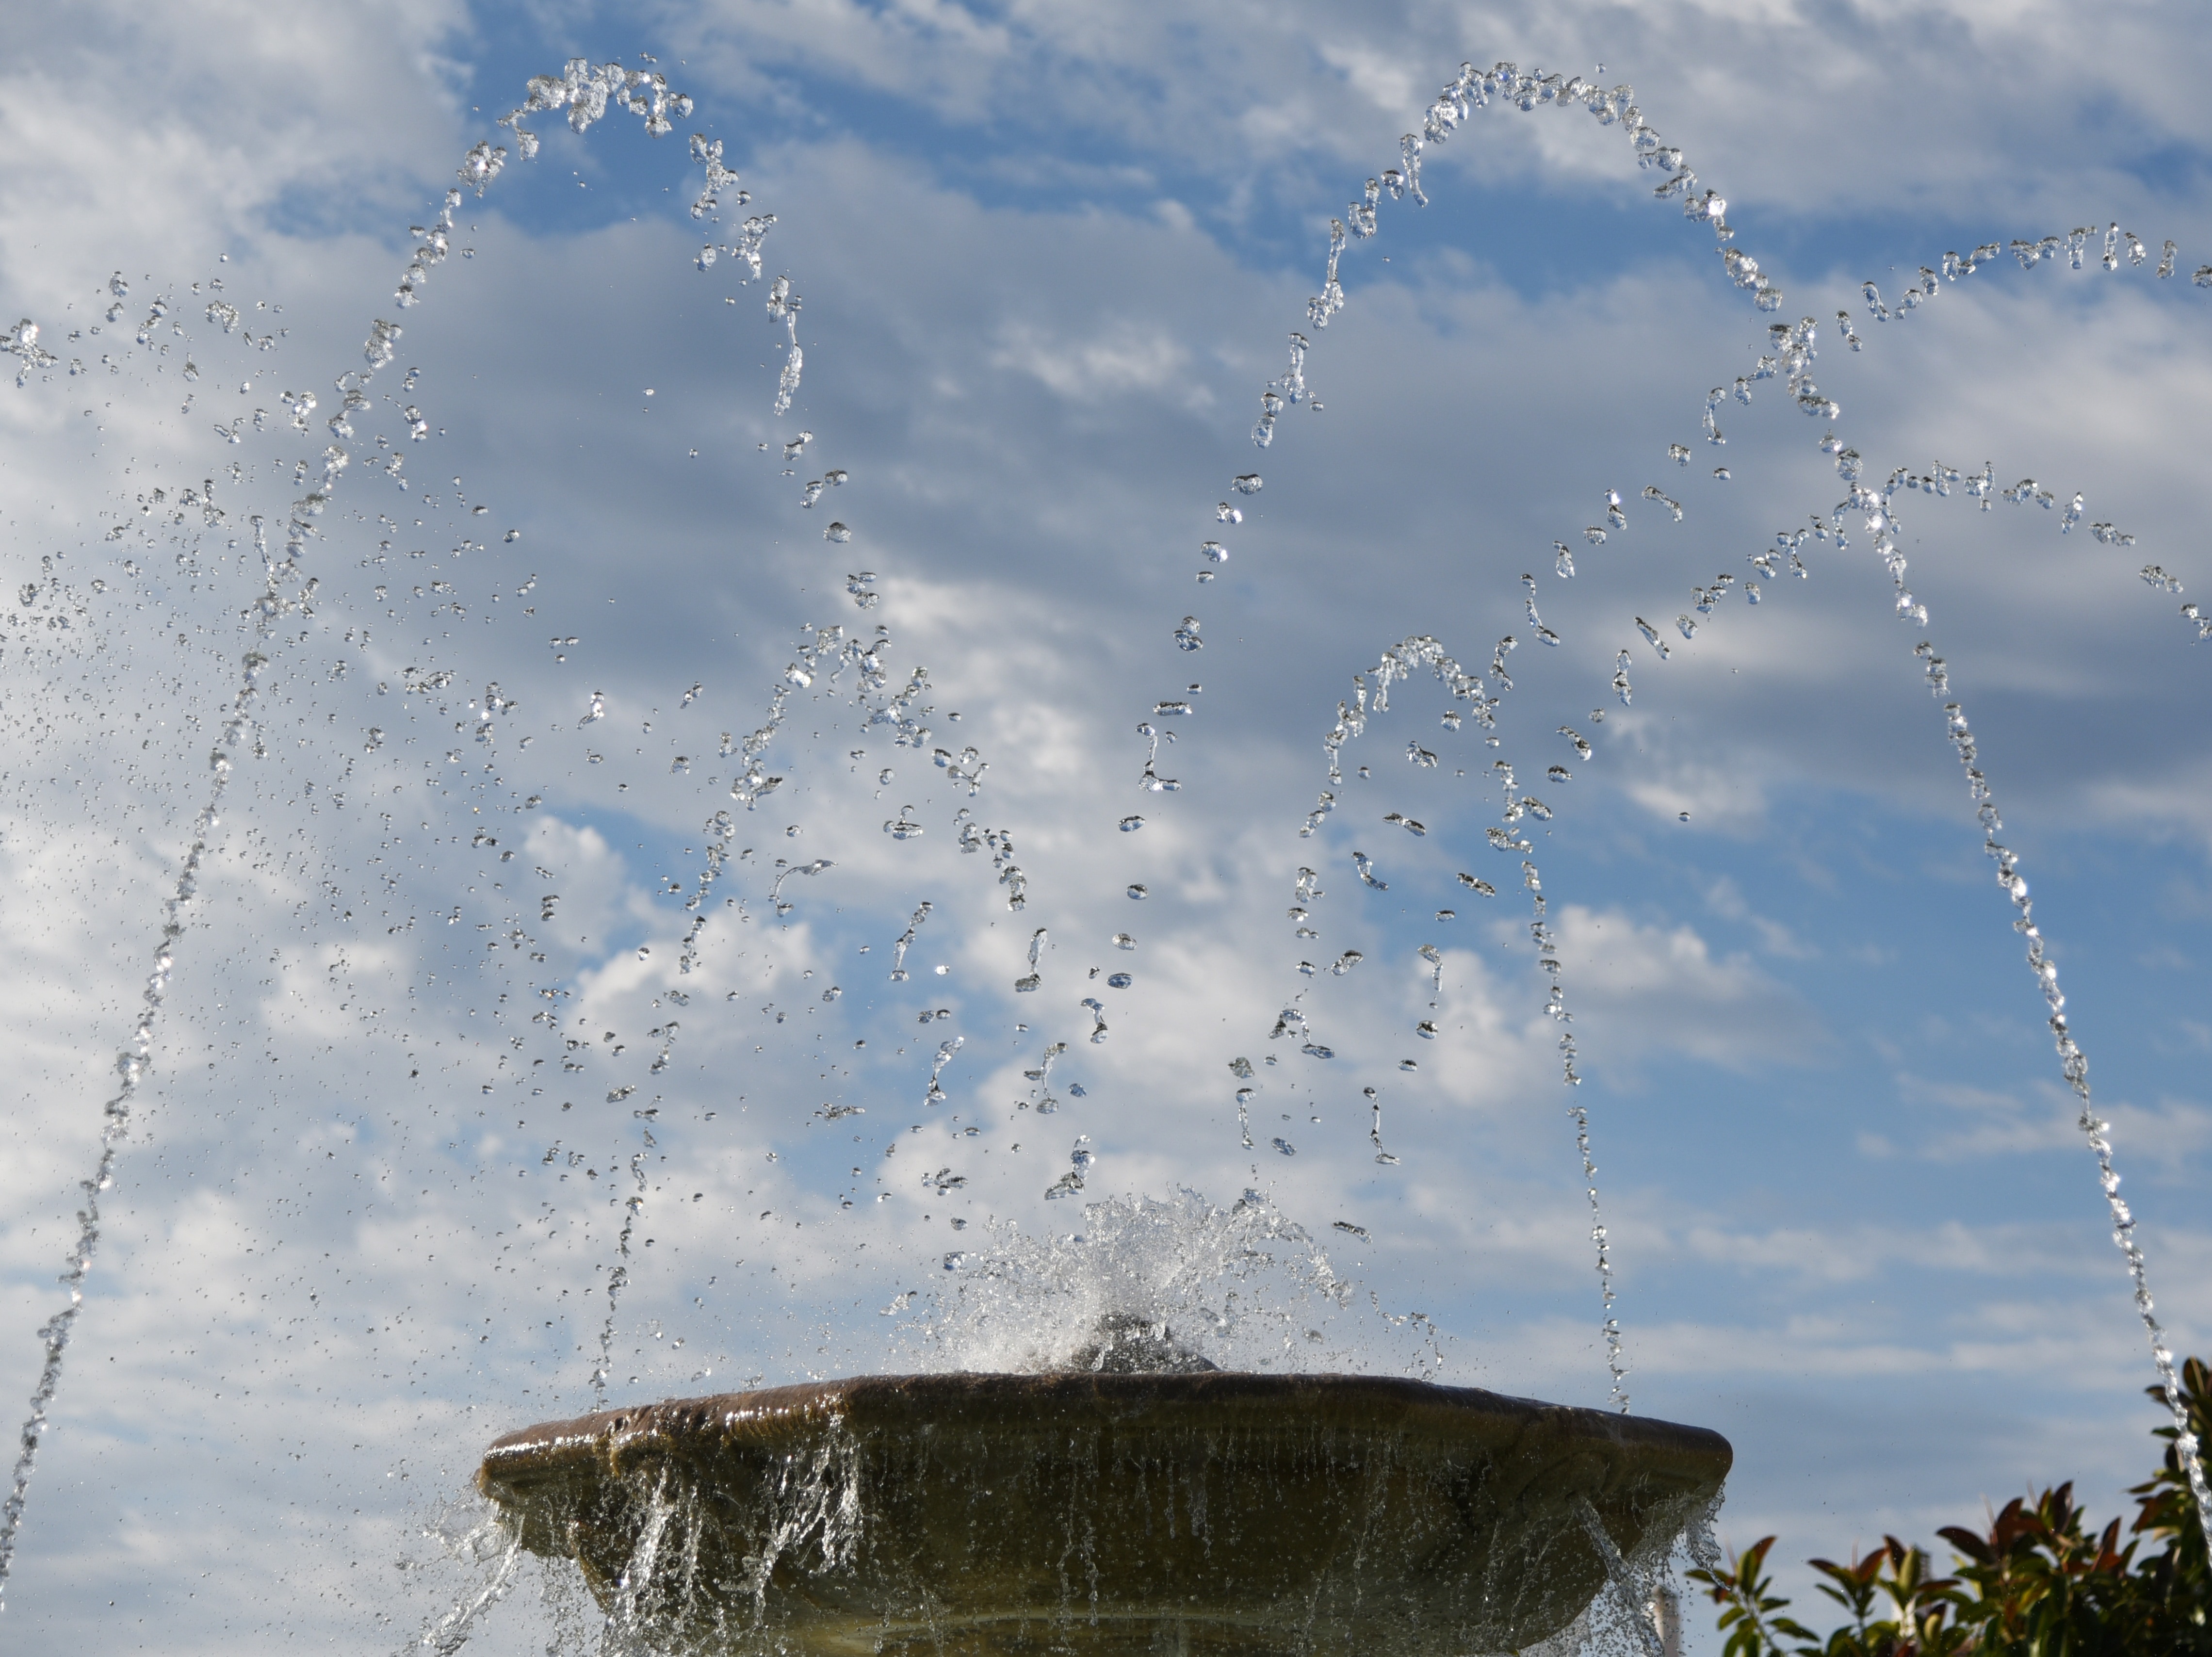 time lapse photography of fountain under cloudy sky during daytime